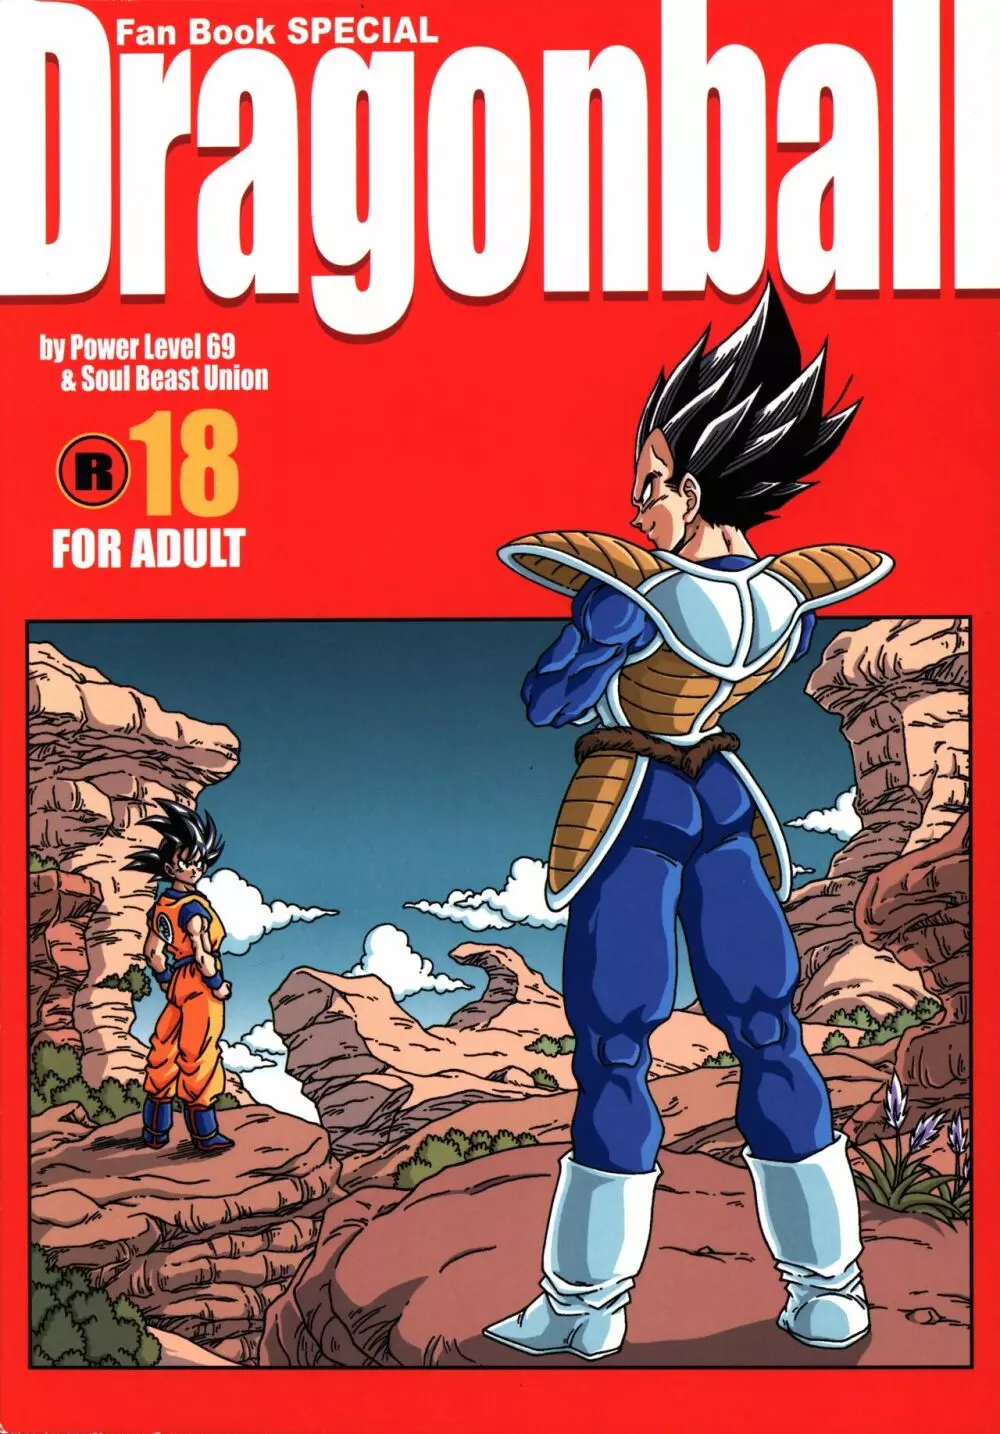 Dragonball Fan Book SPECIAL Page.1